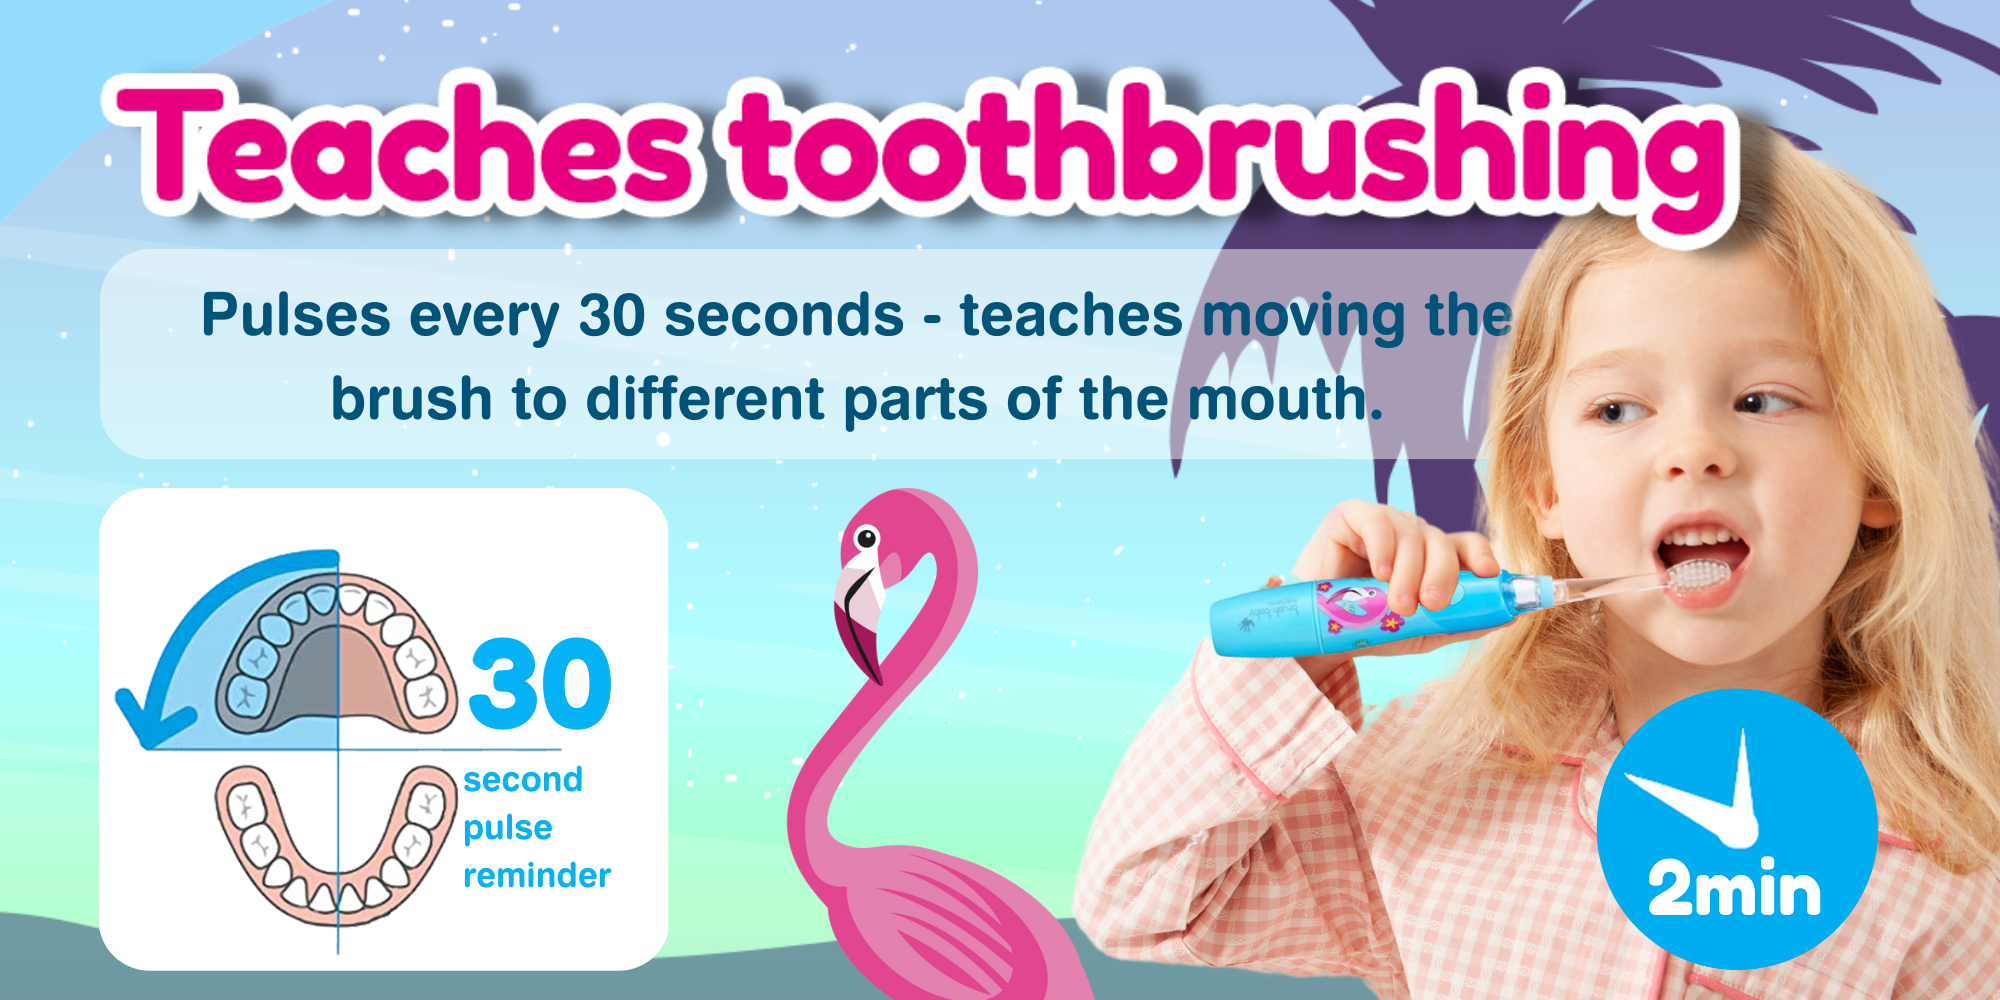 Teach toothbrushing to children - best toothbrush for kids